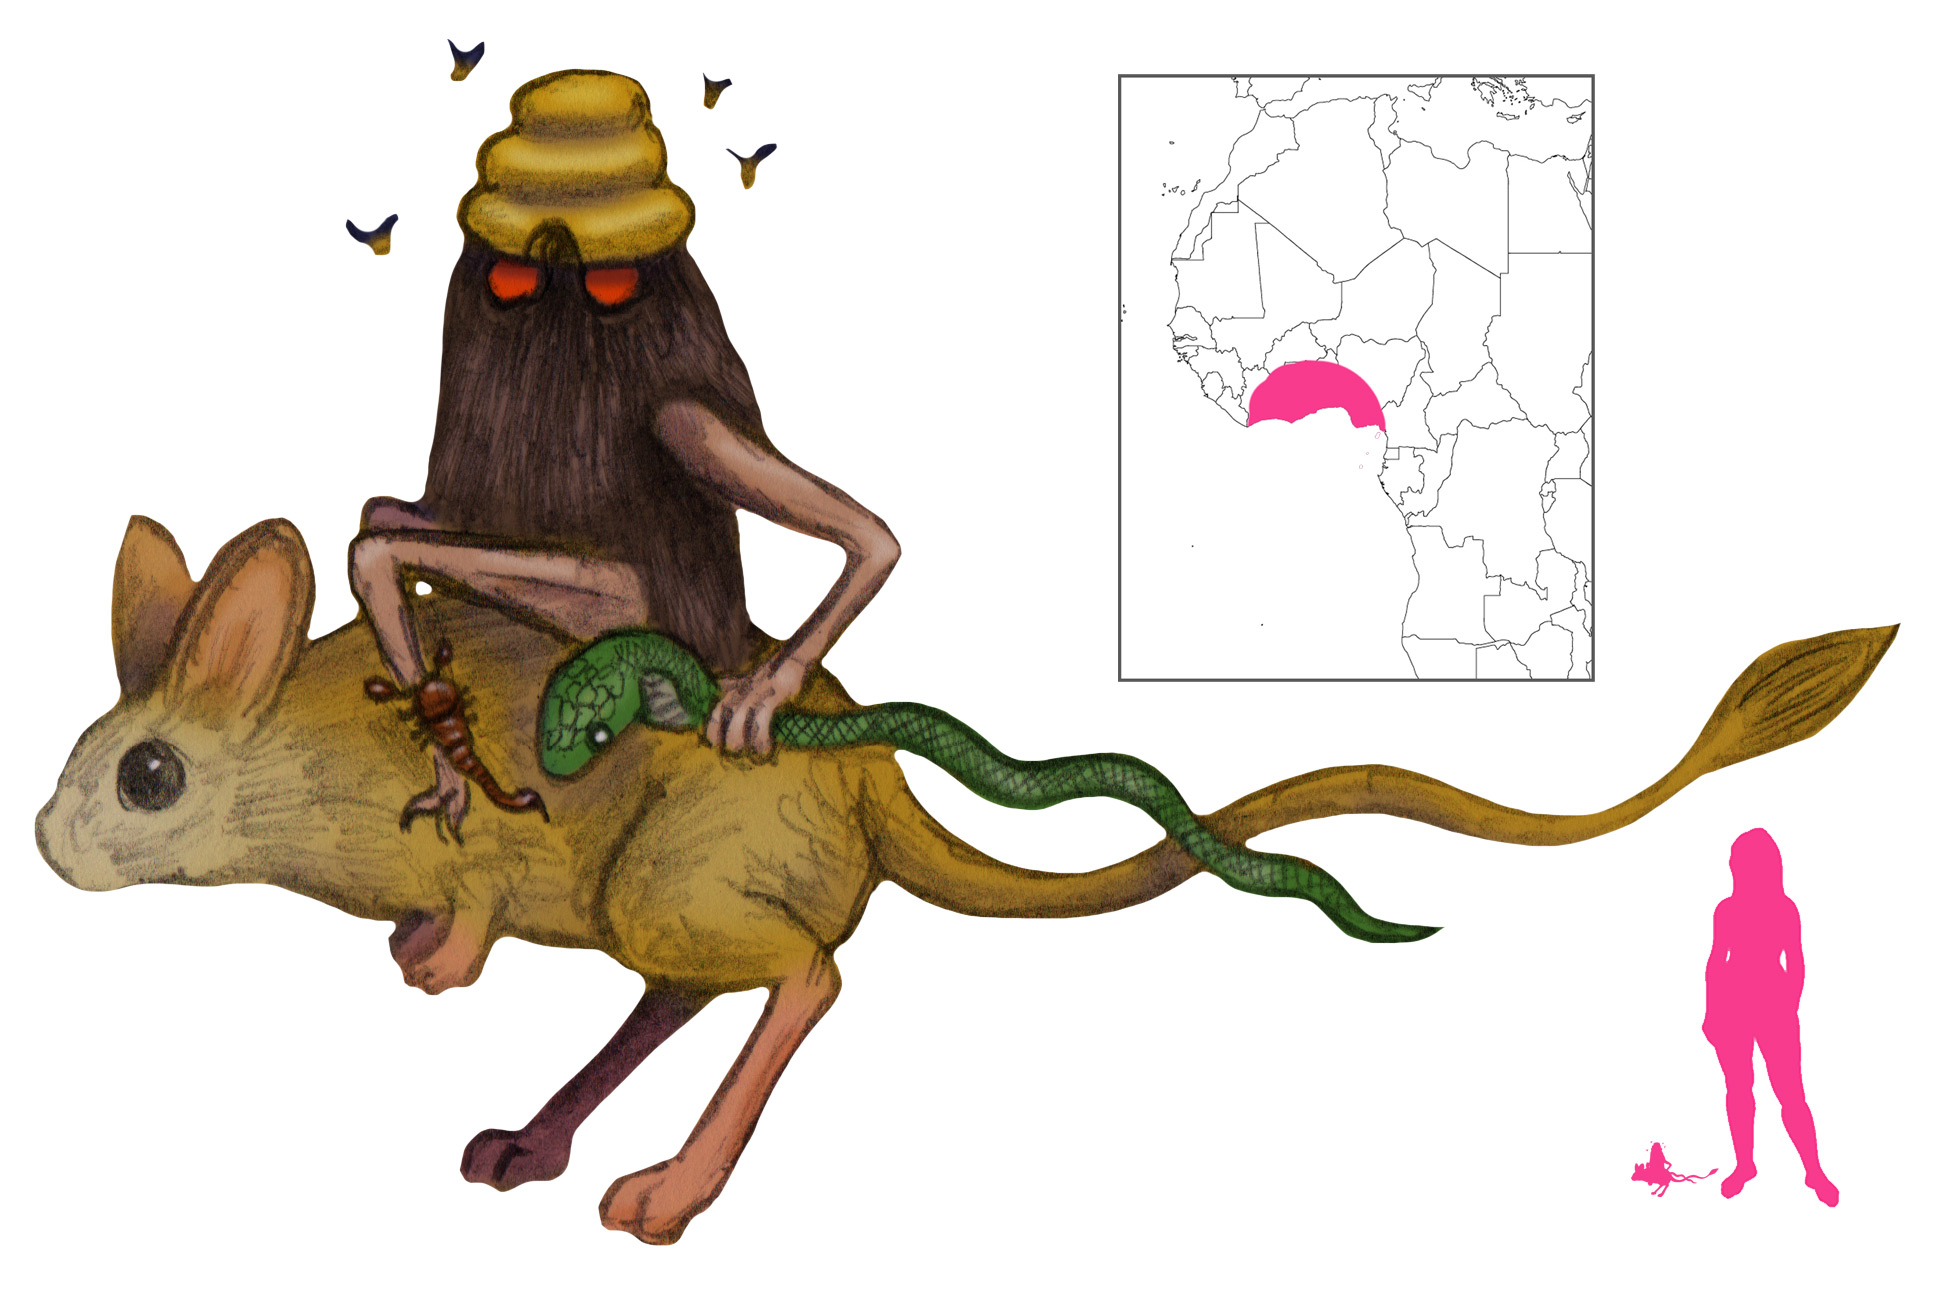 Here be monsters: The search for Africa's mythical beasts